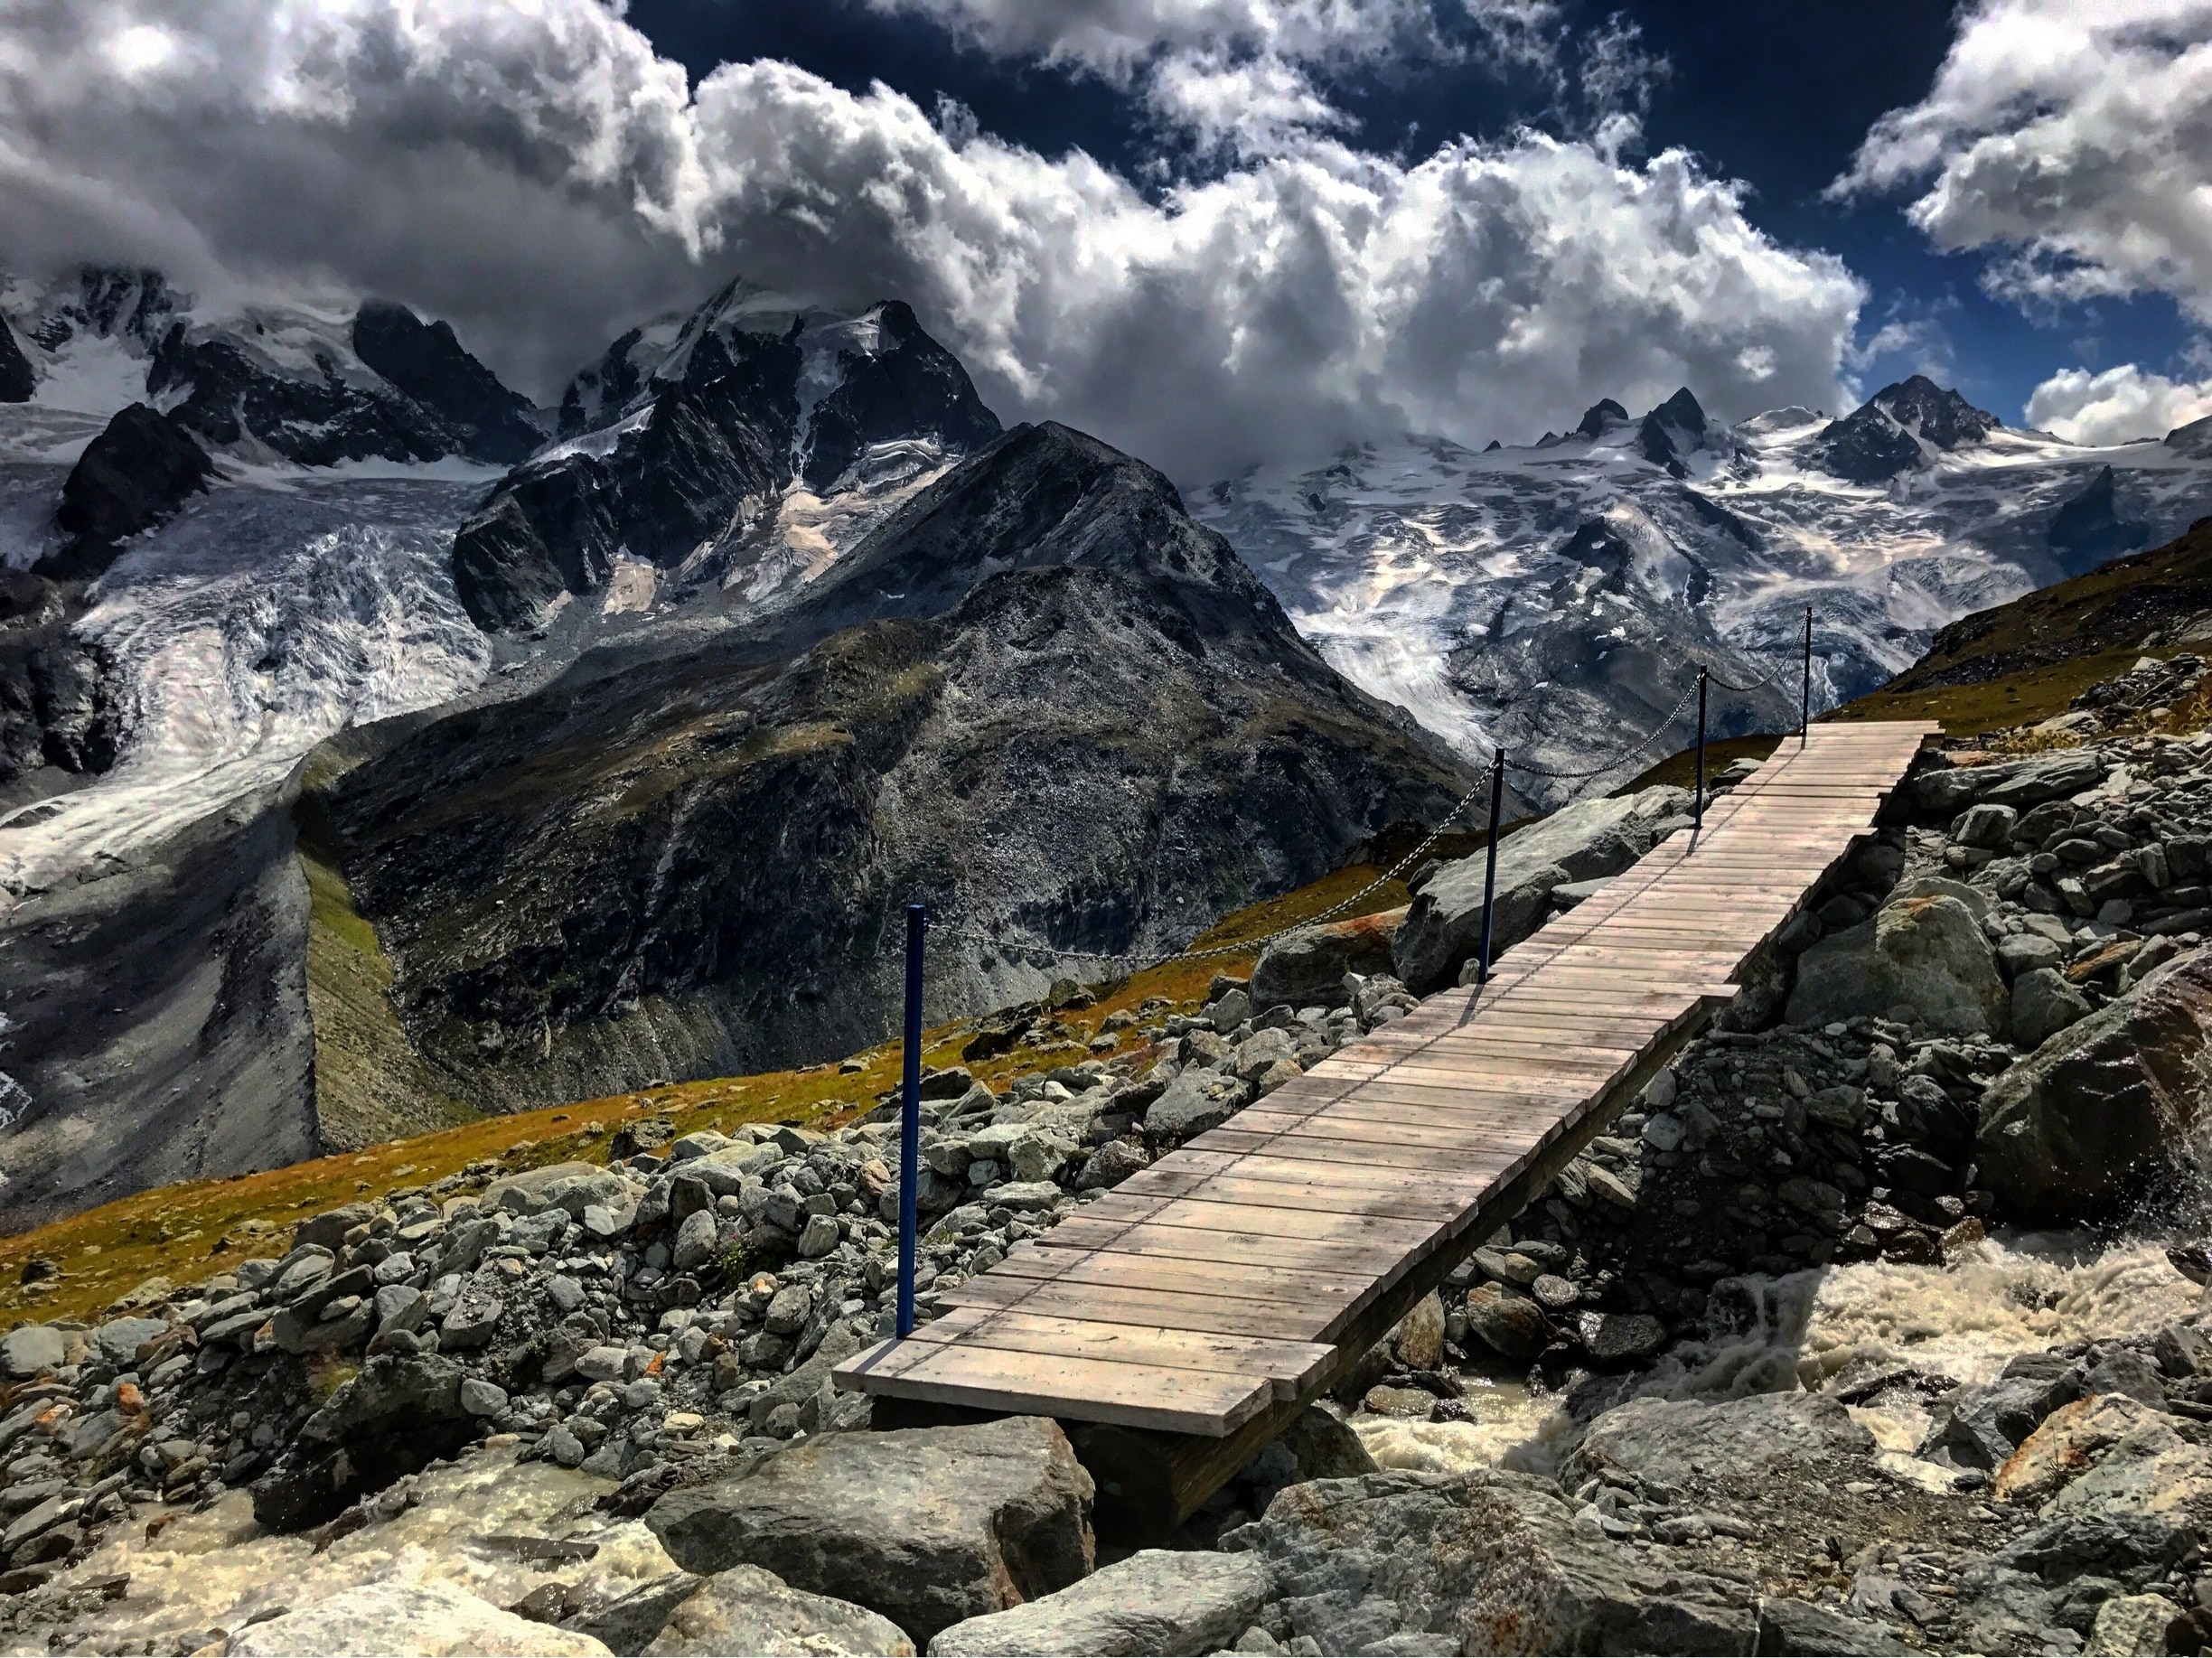 The hike from Corvatsch Station to the mountain hut Chamanna Coaz is just over 5.5 miles one way and provides uninterrupted views of mountains, glaciers, waterfalls, and lakes along the way.  #mysummervacation #lifeatexpedia #hiking #mountains #Switzerland